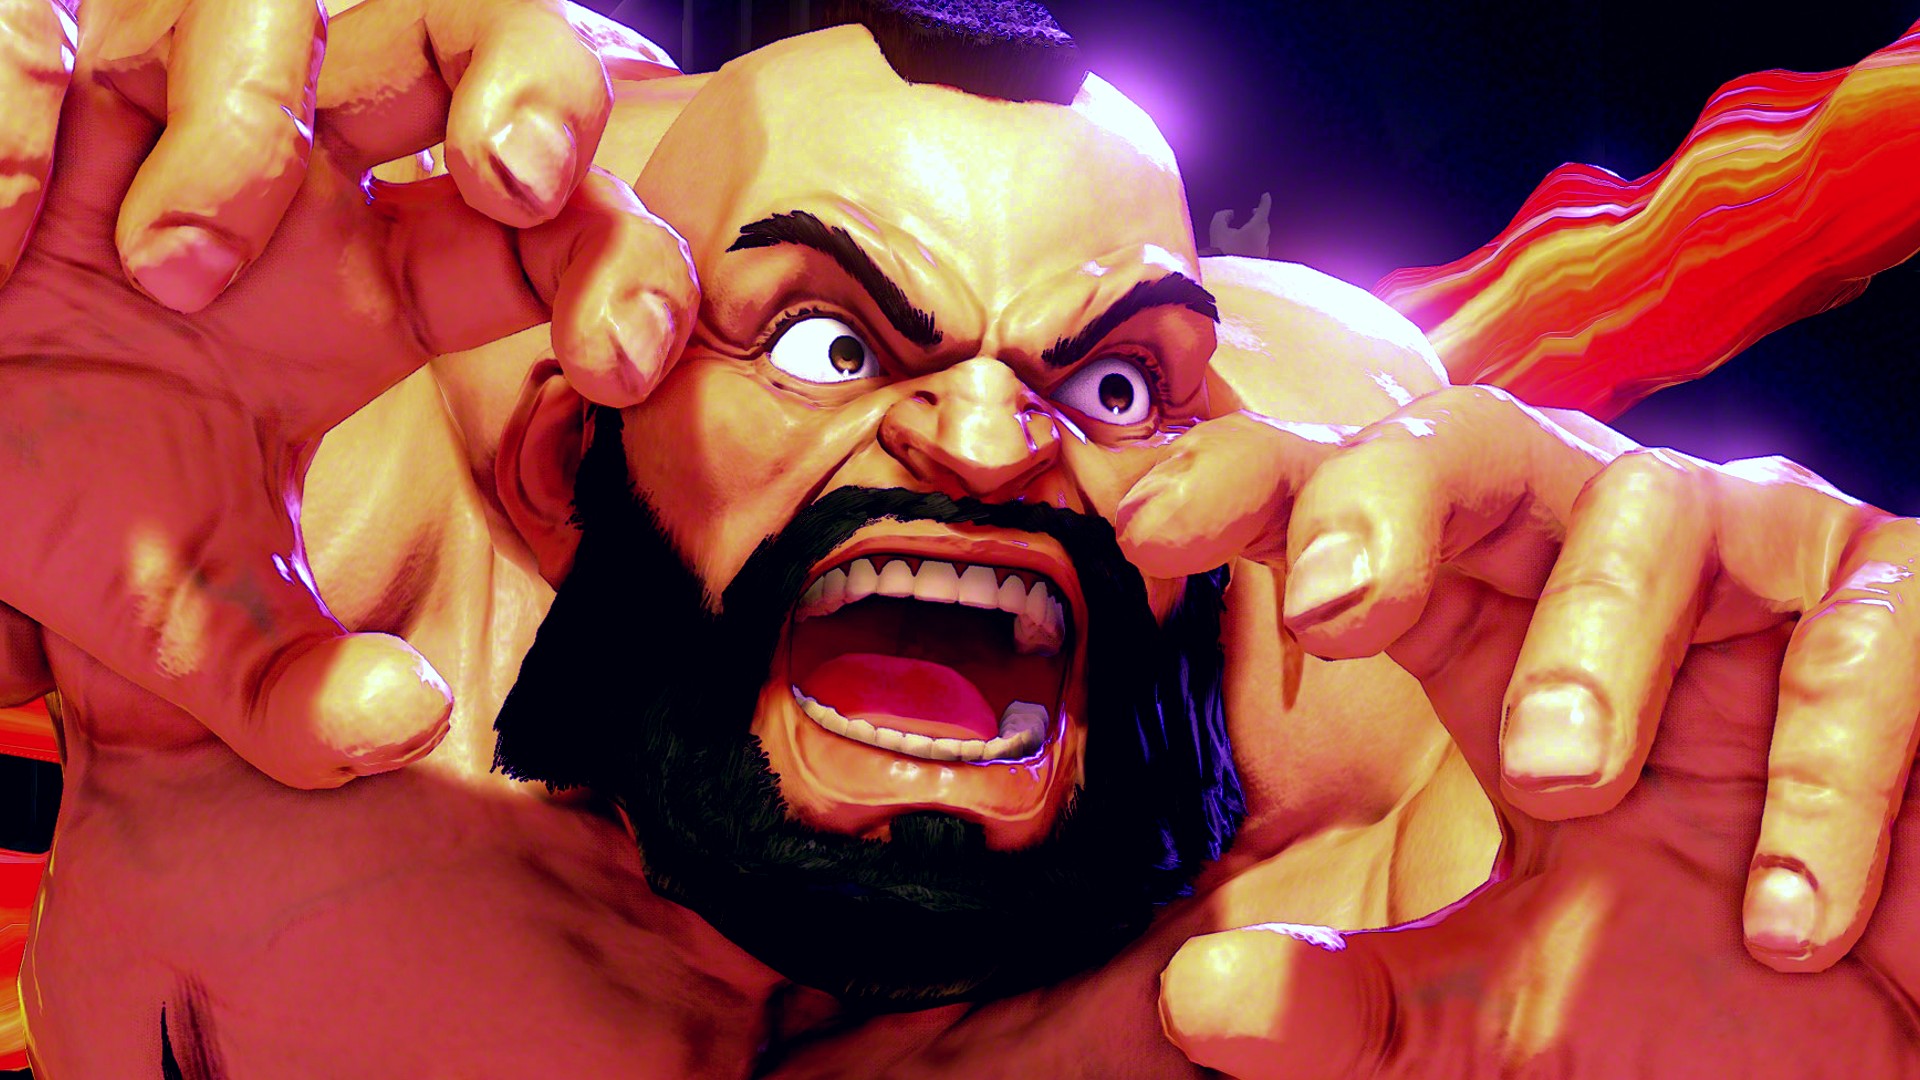 Zangief's worst move may have gotten a lot better in Street